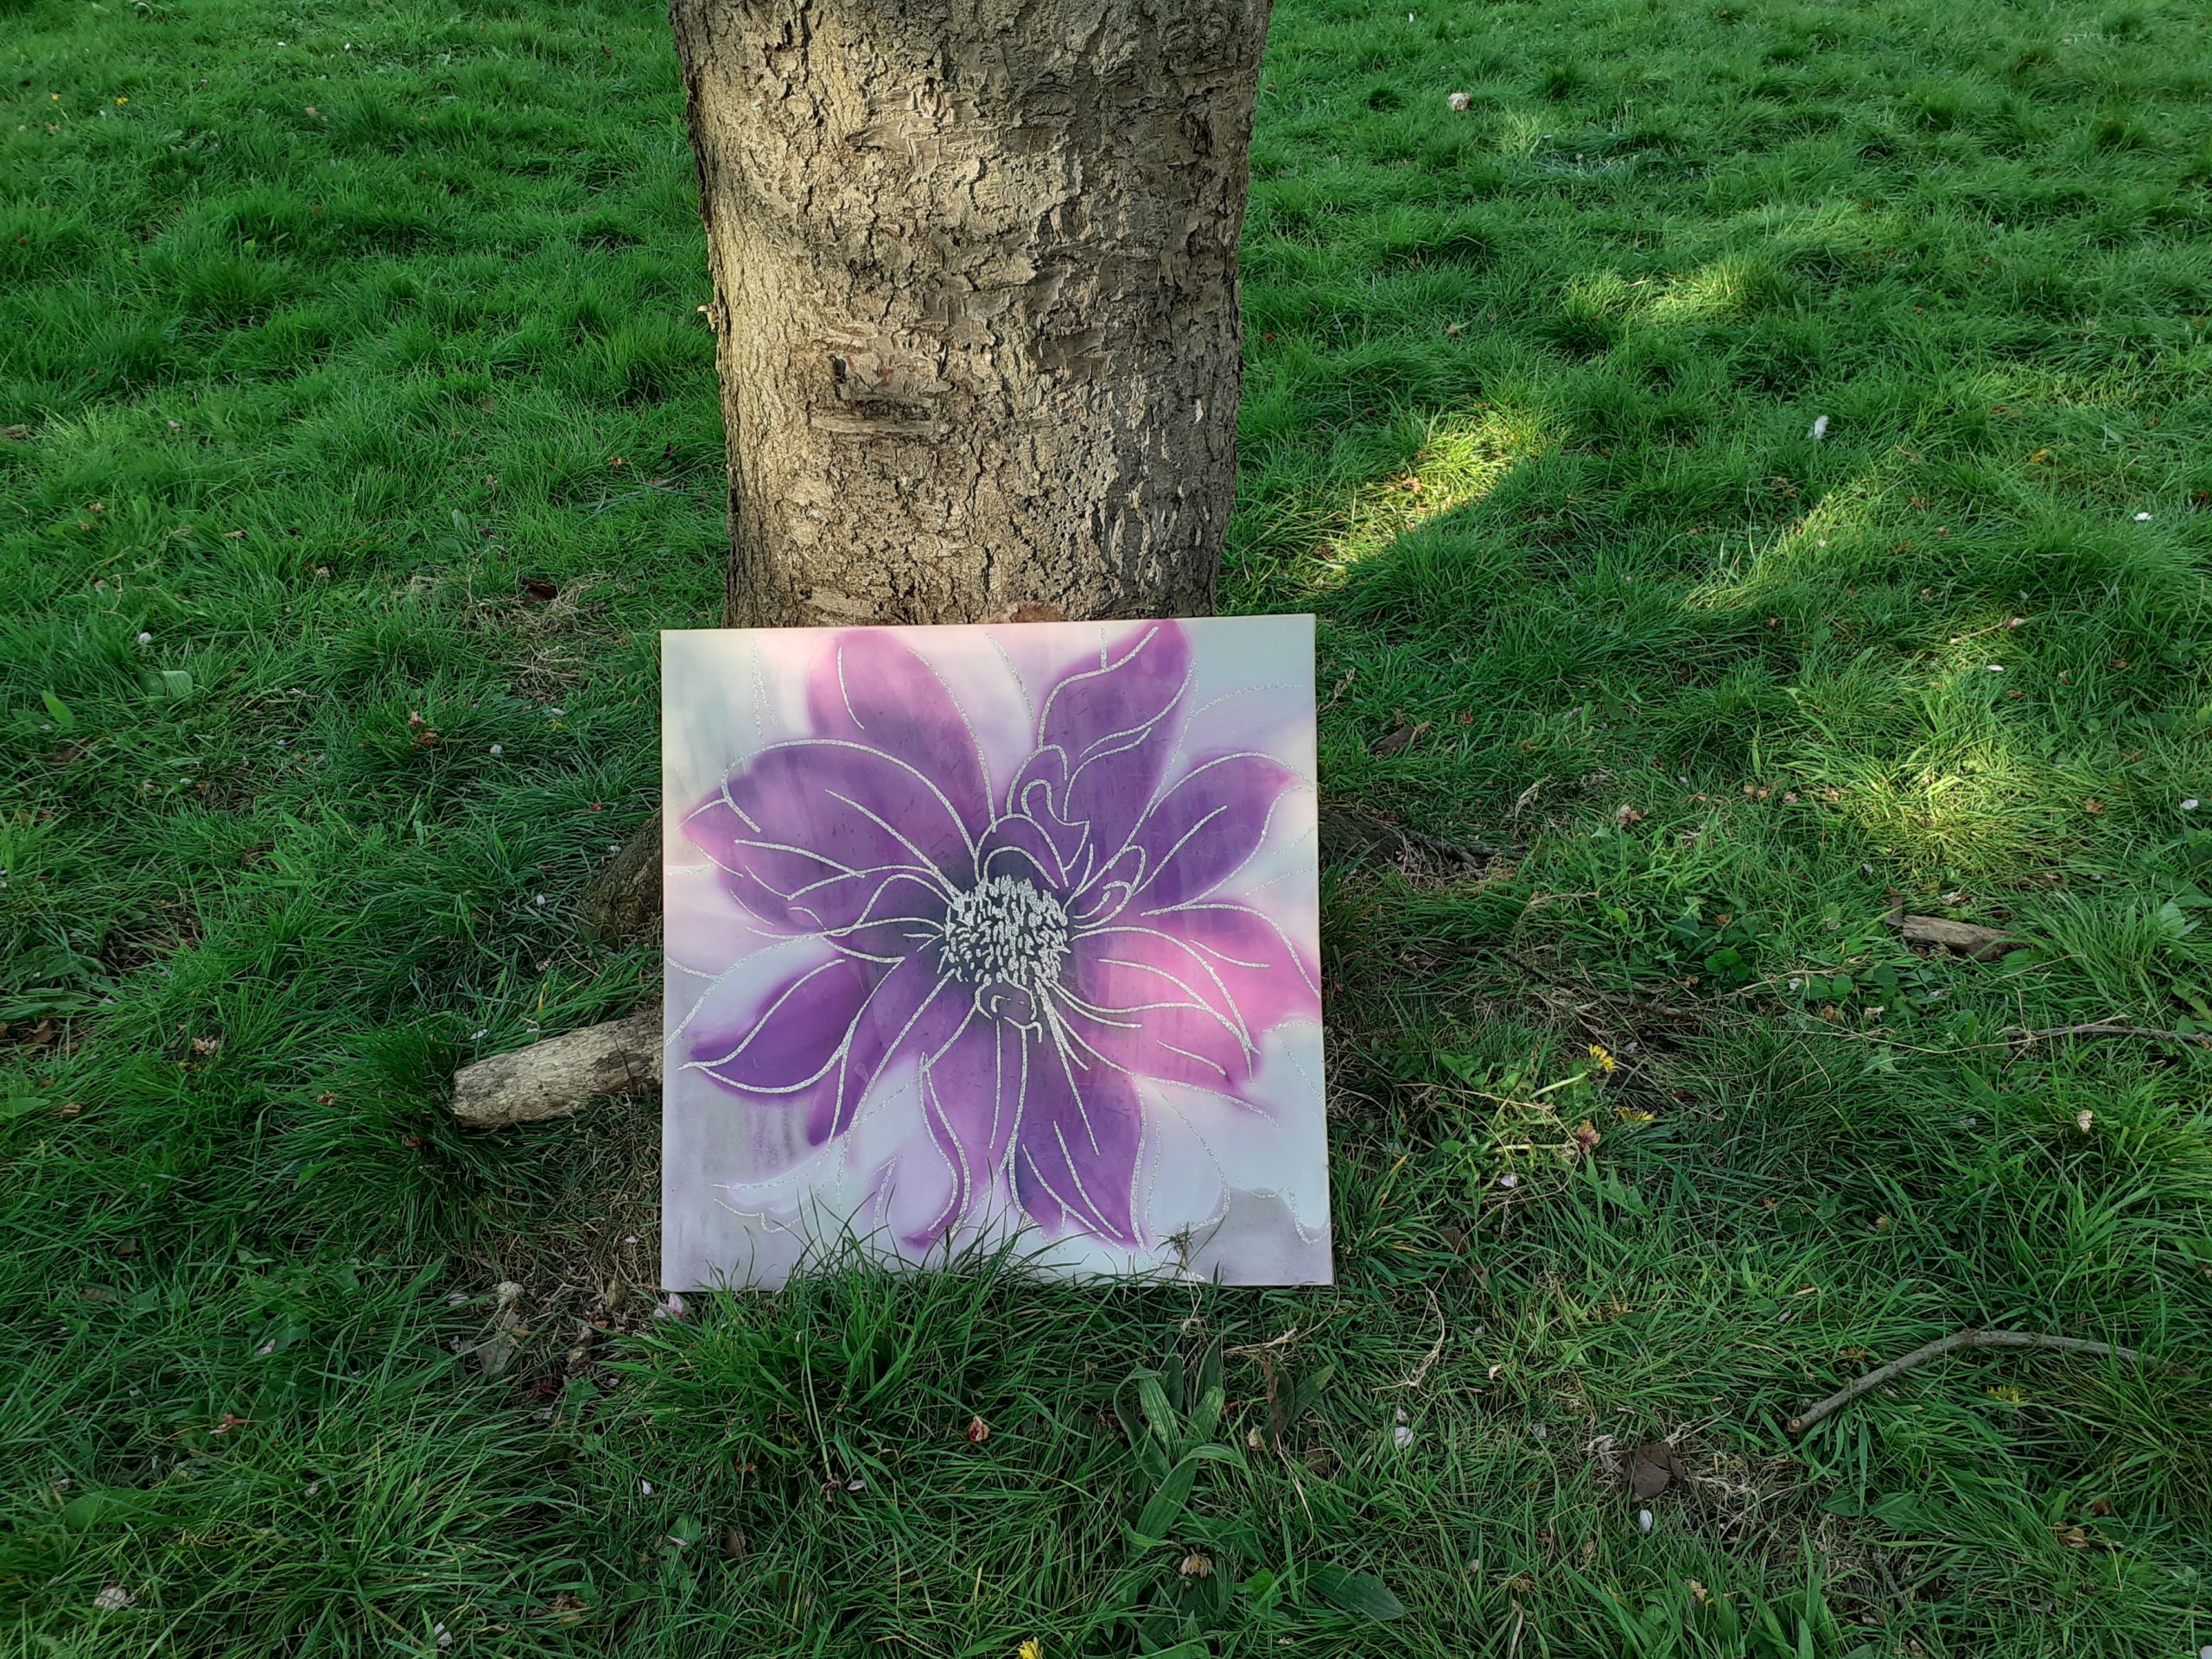 a painting of a pink flower underneath the tree. shadows and light on the green grass